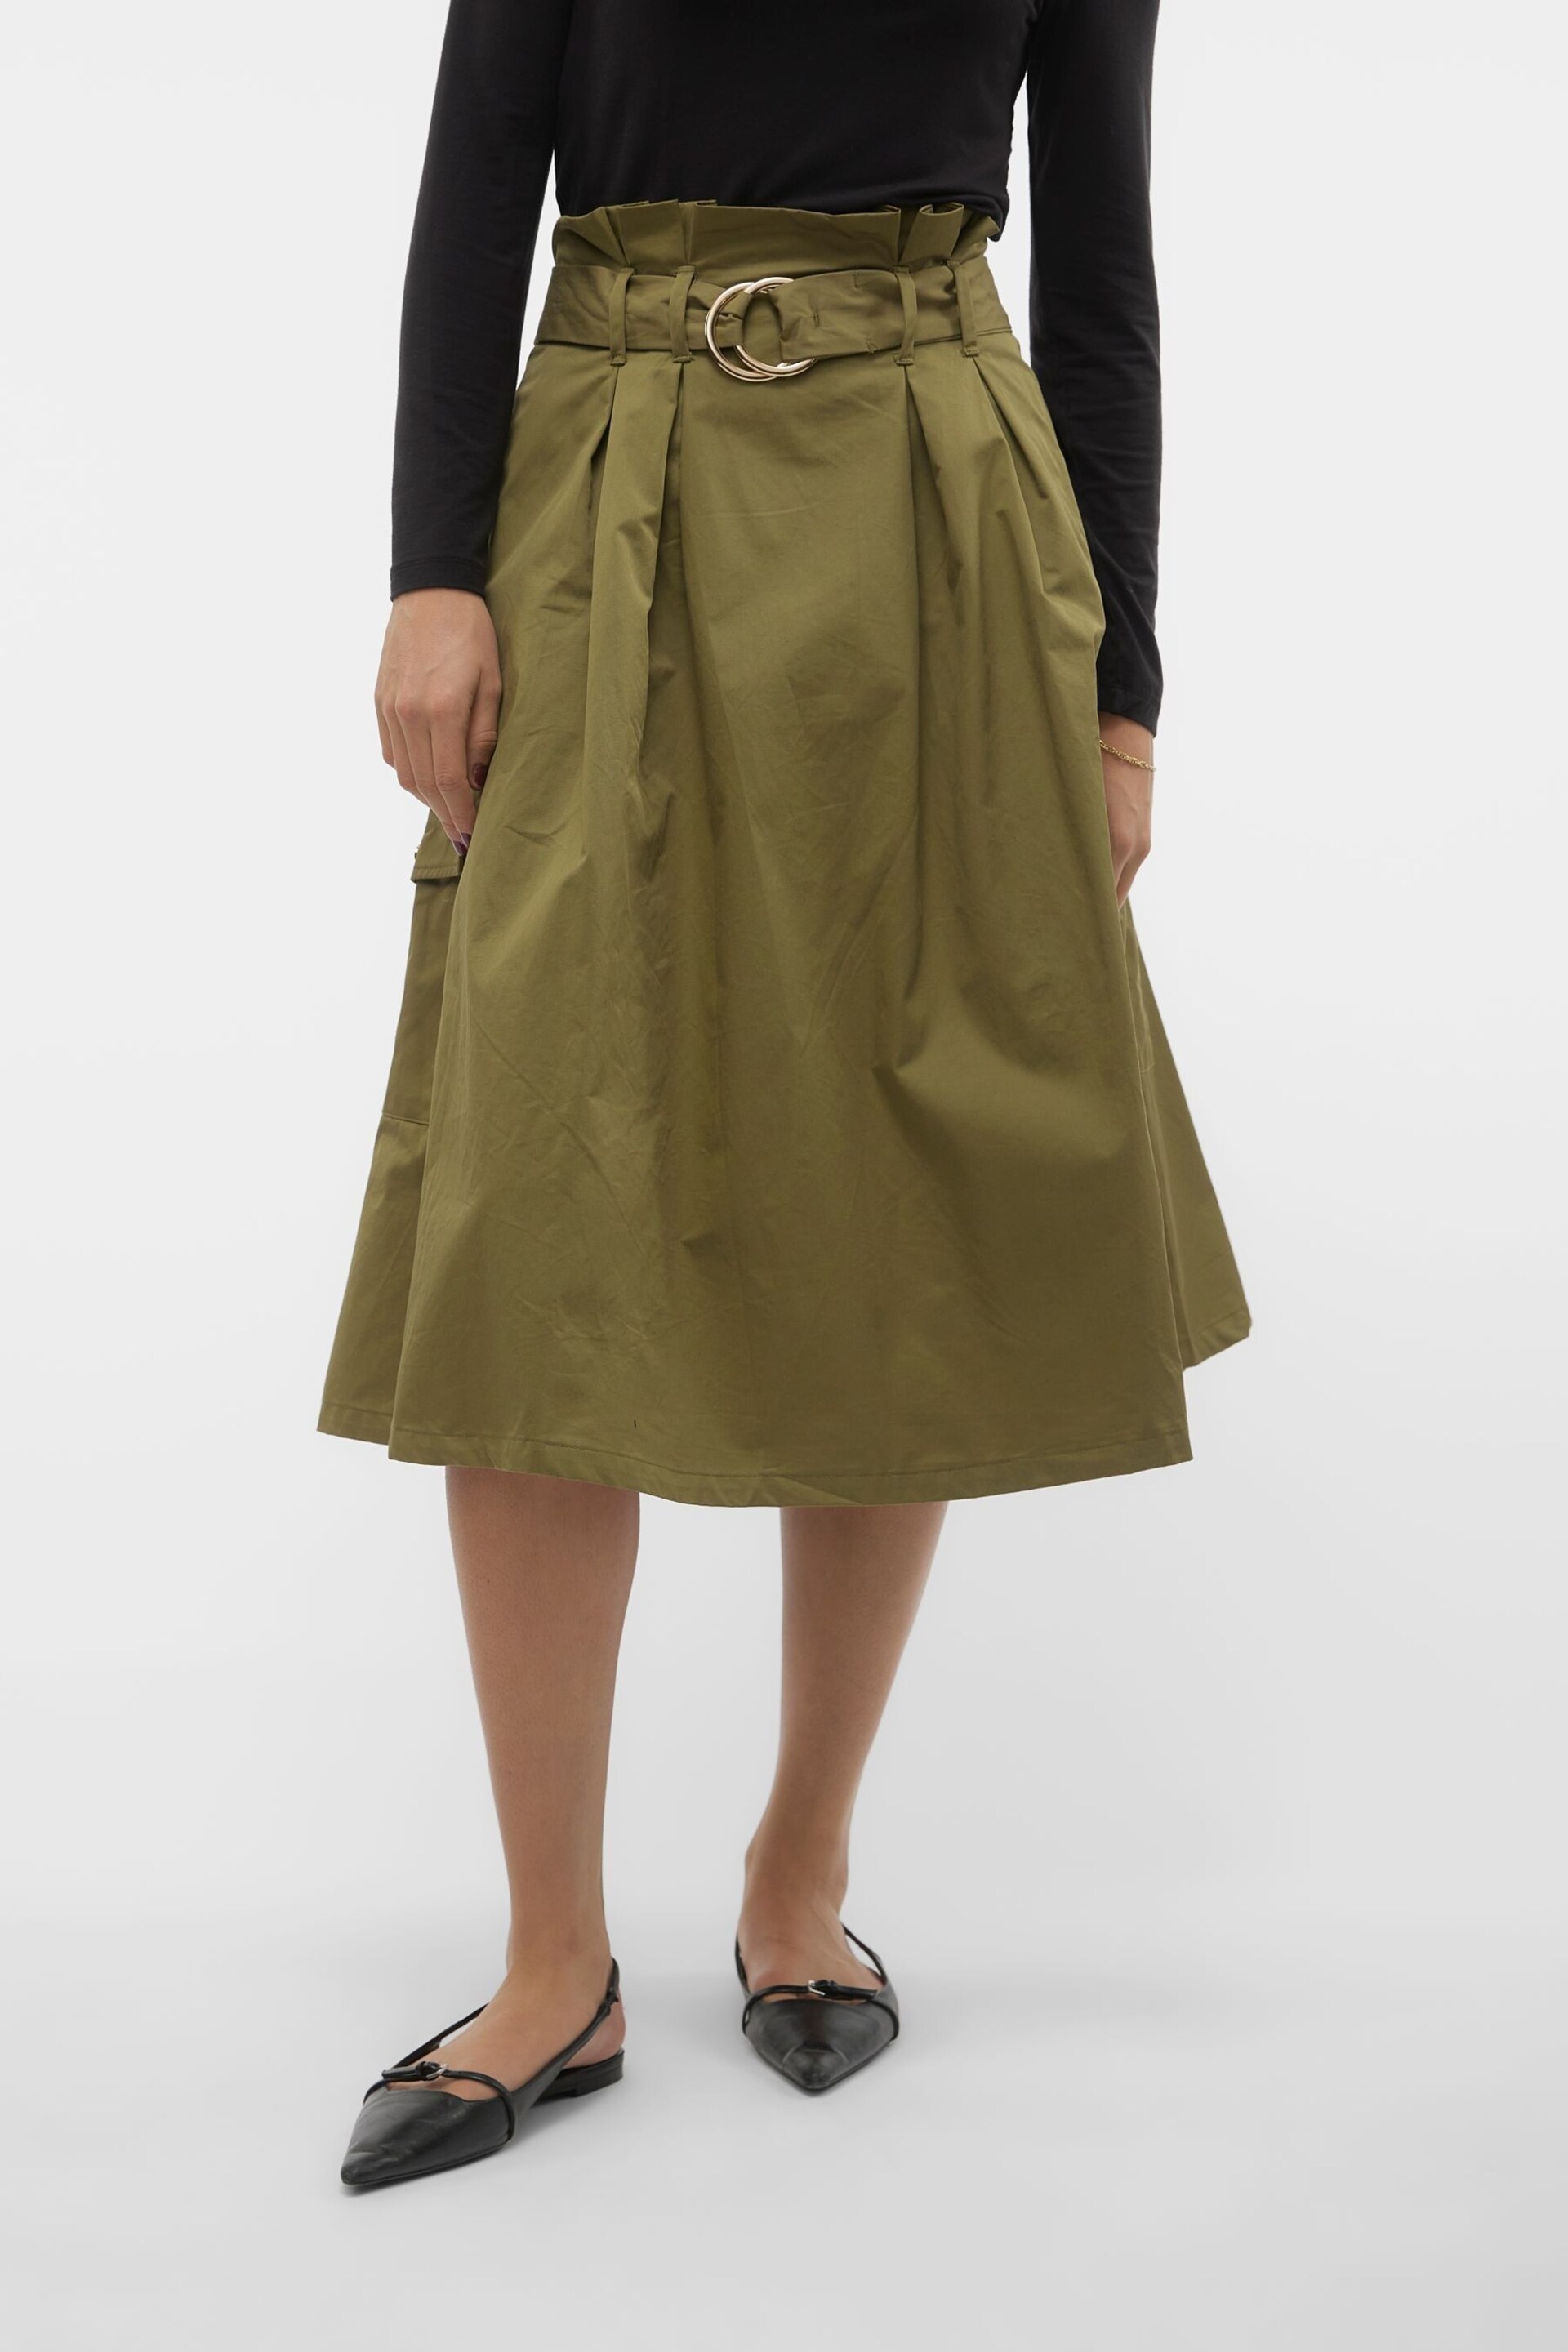 VERO MODA Green Belted A-Line Cargo Utility Midi Skirt - Image 3 of 4